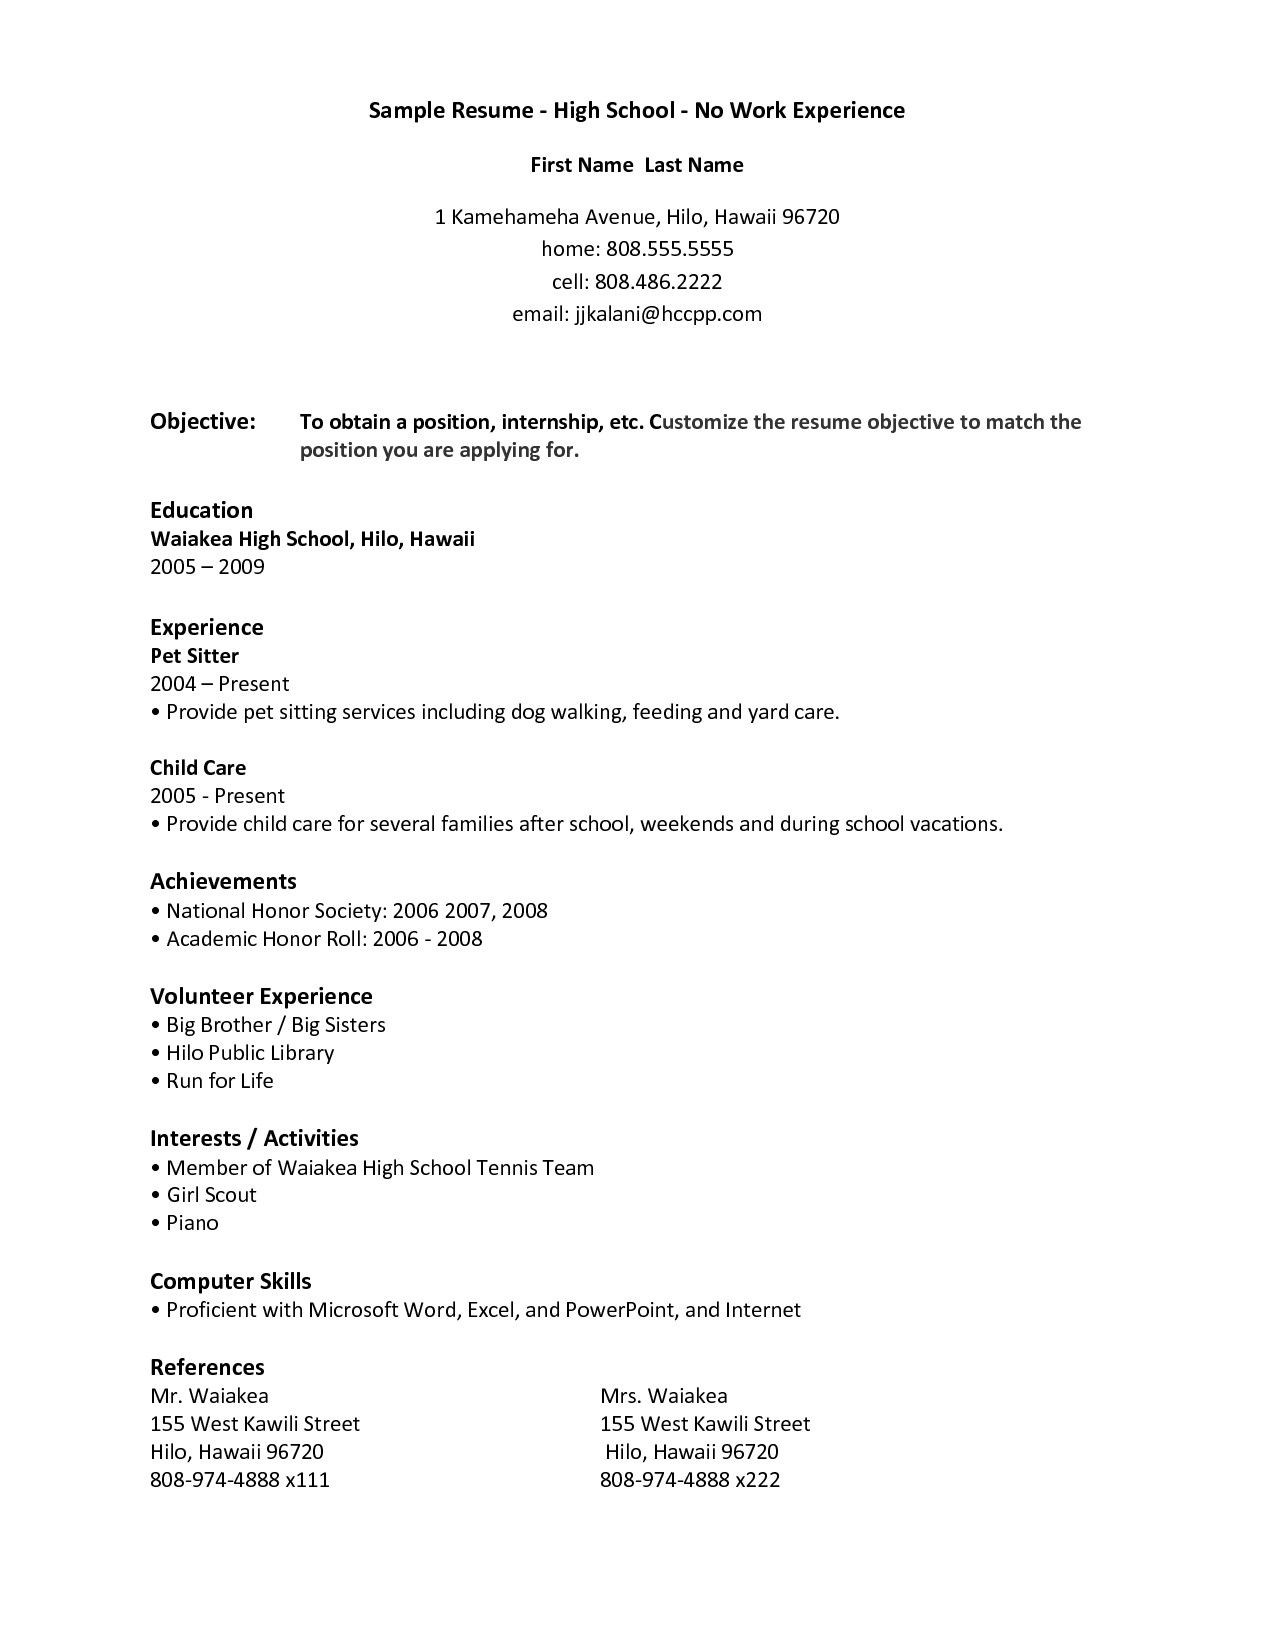 Sample Resume for Highschool Student with No Work Experience Free Resume Templates No Work Experience #experience …